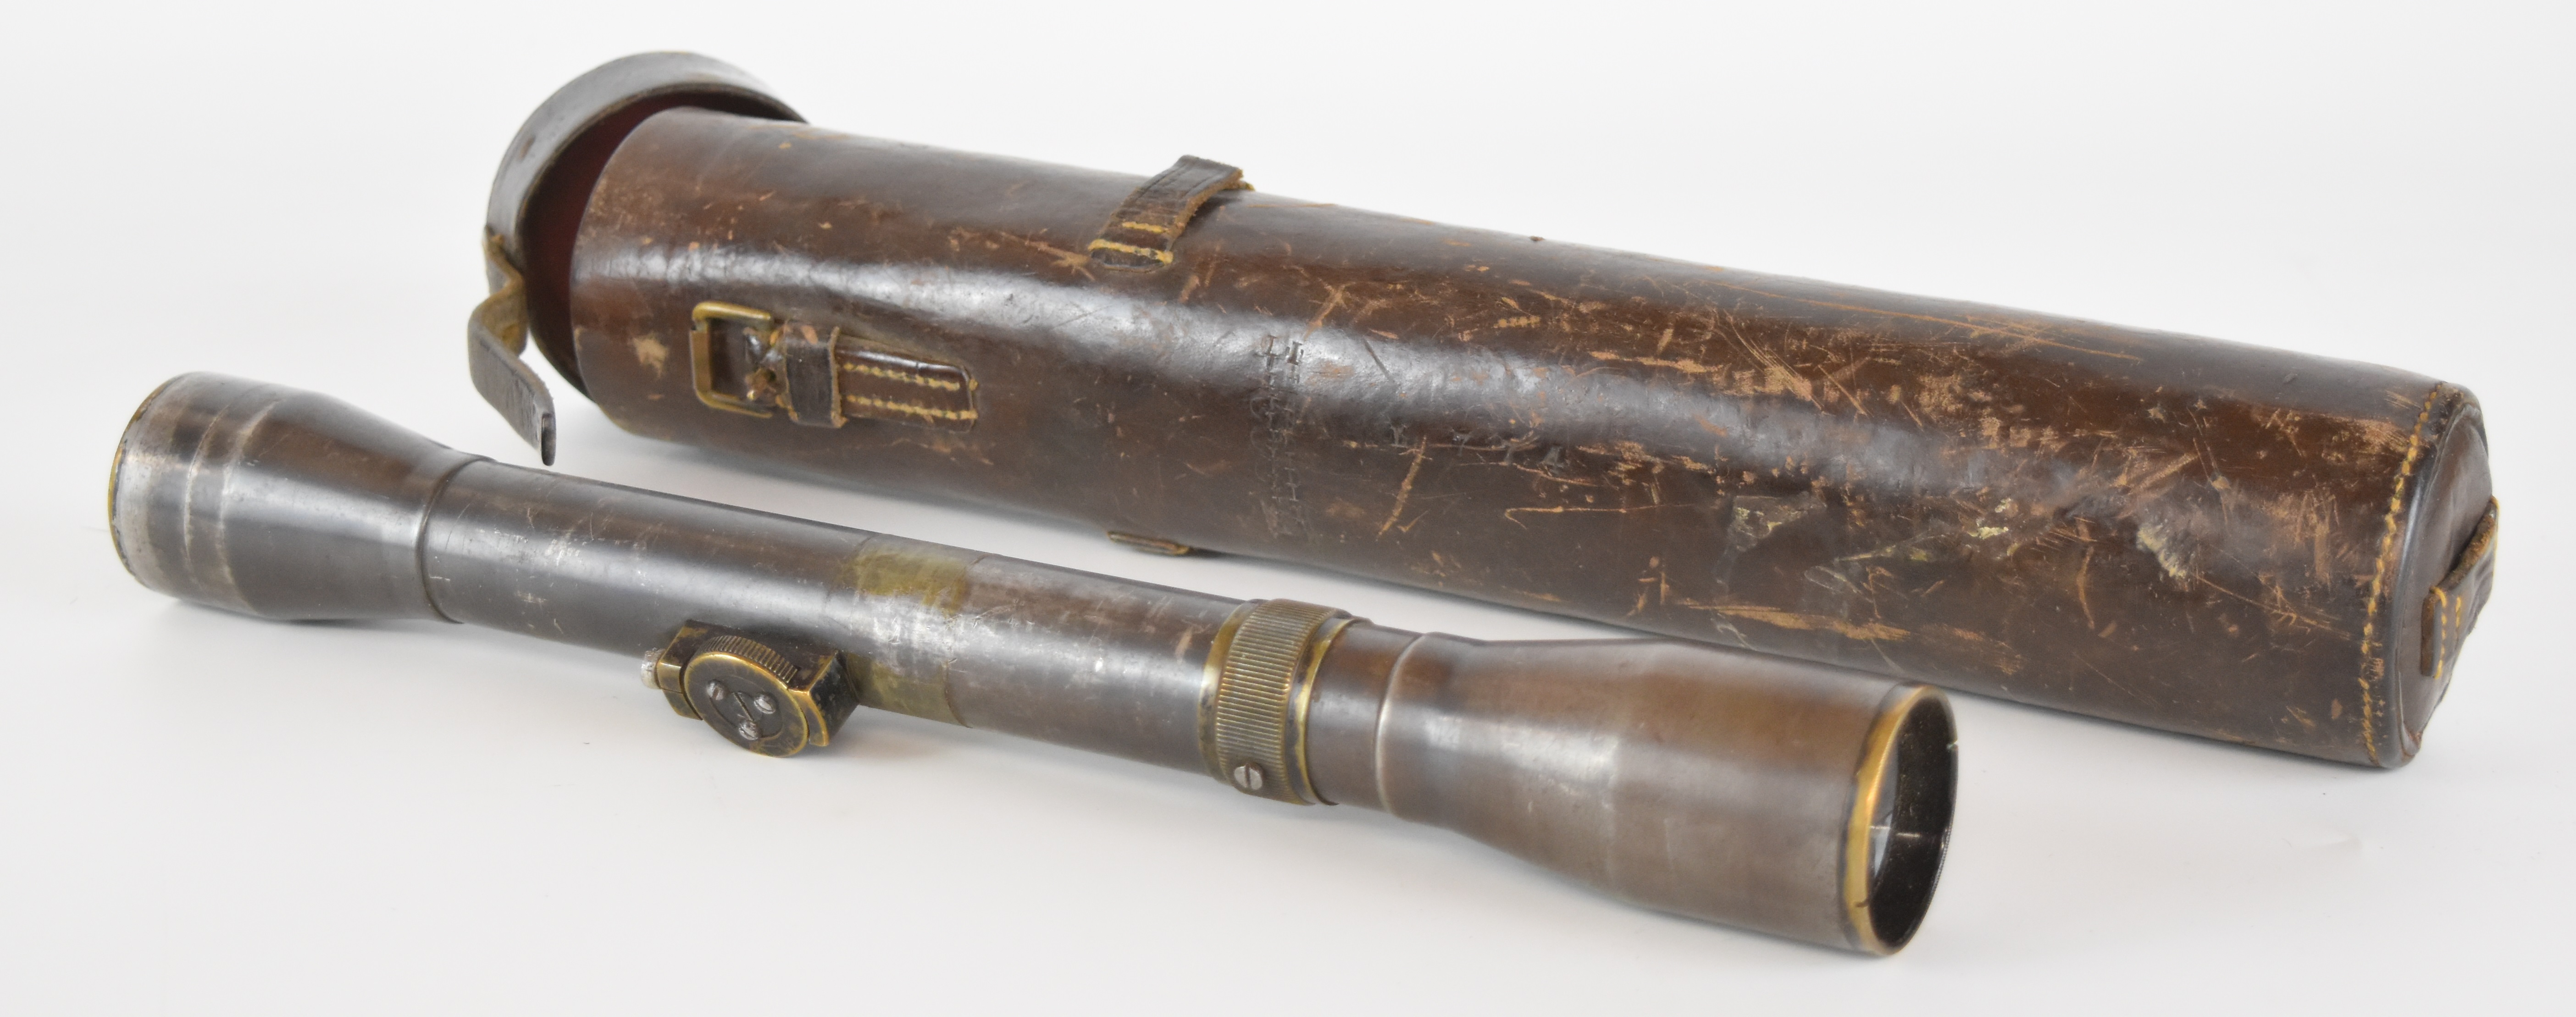 WW2 Rudiger of Germany adjustable 5x56 sniper rifle scope, 30.5cm long, in fitted leather case. - Image 2 of 3